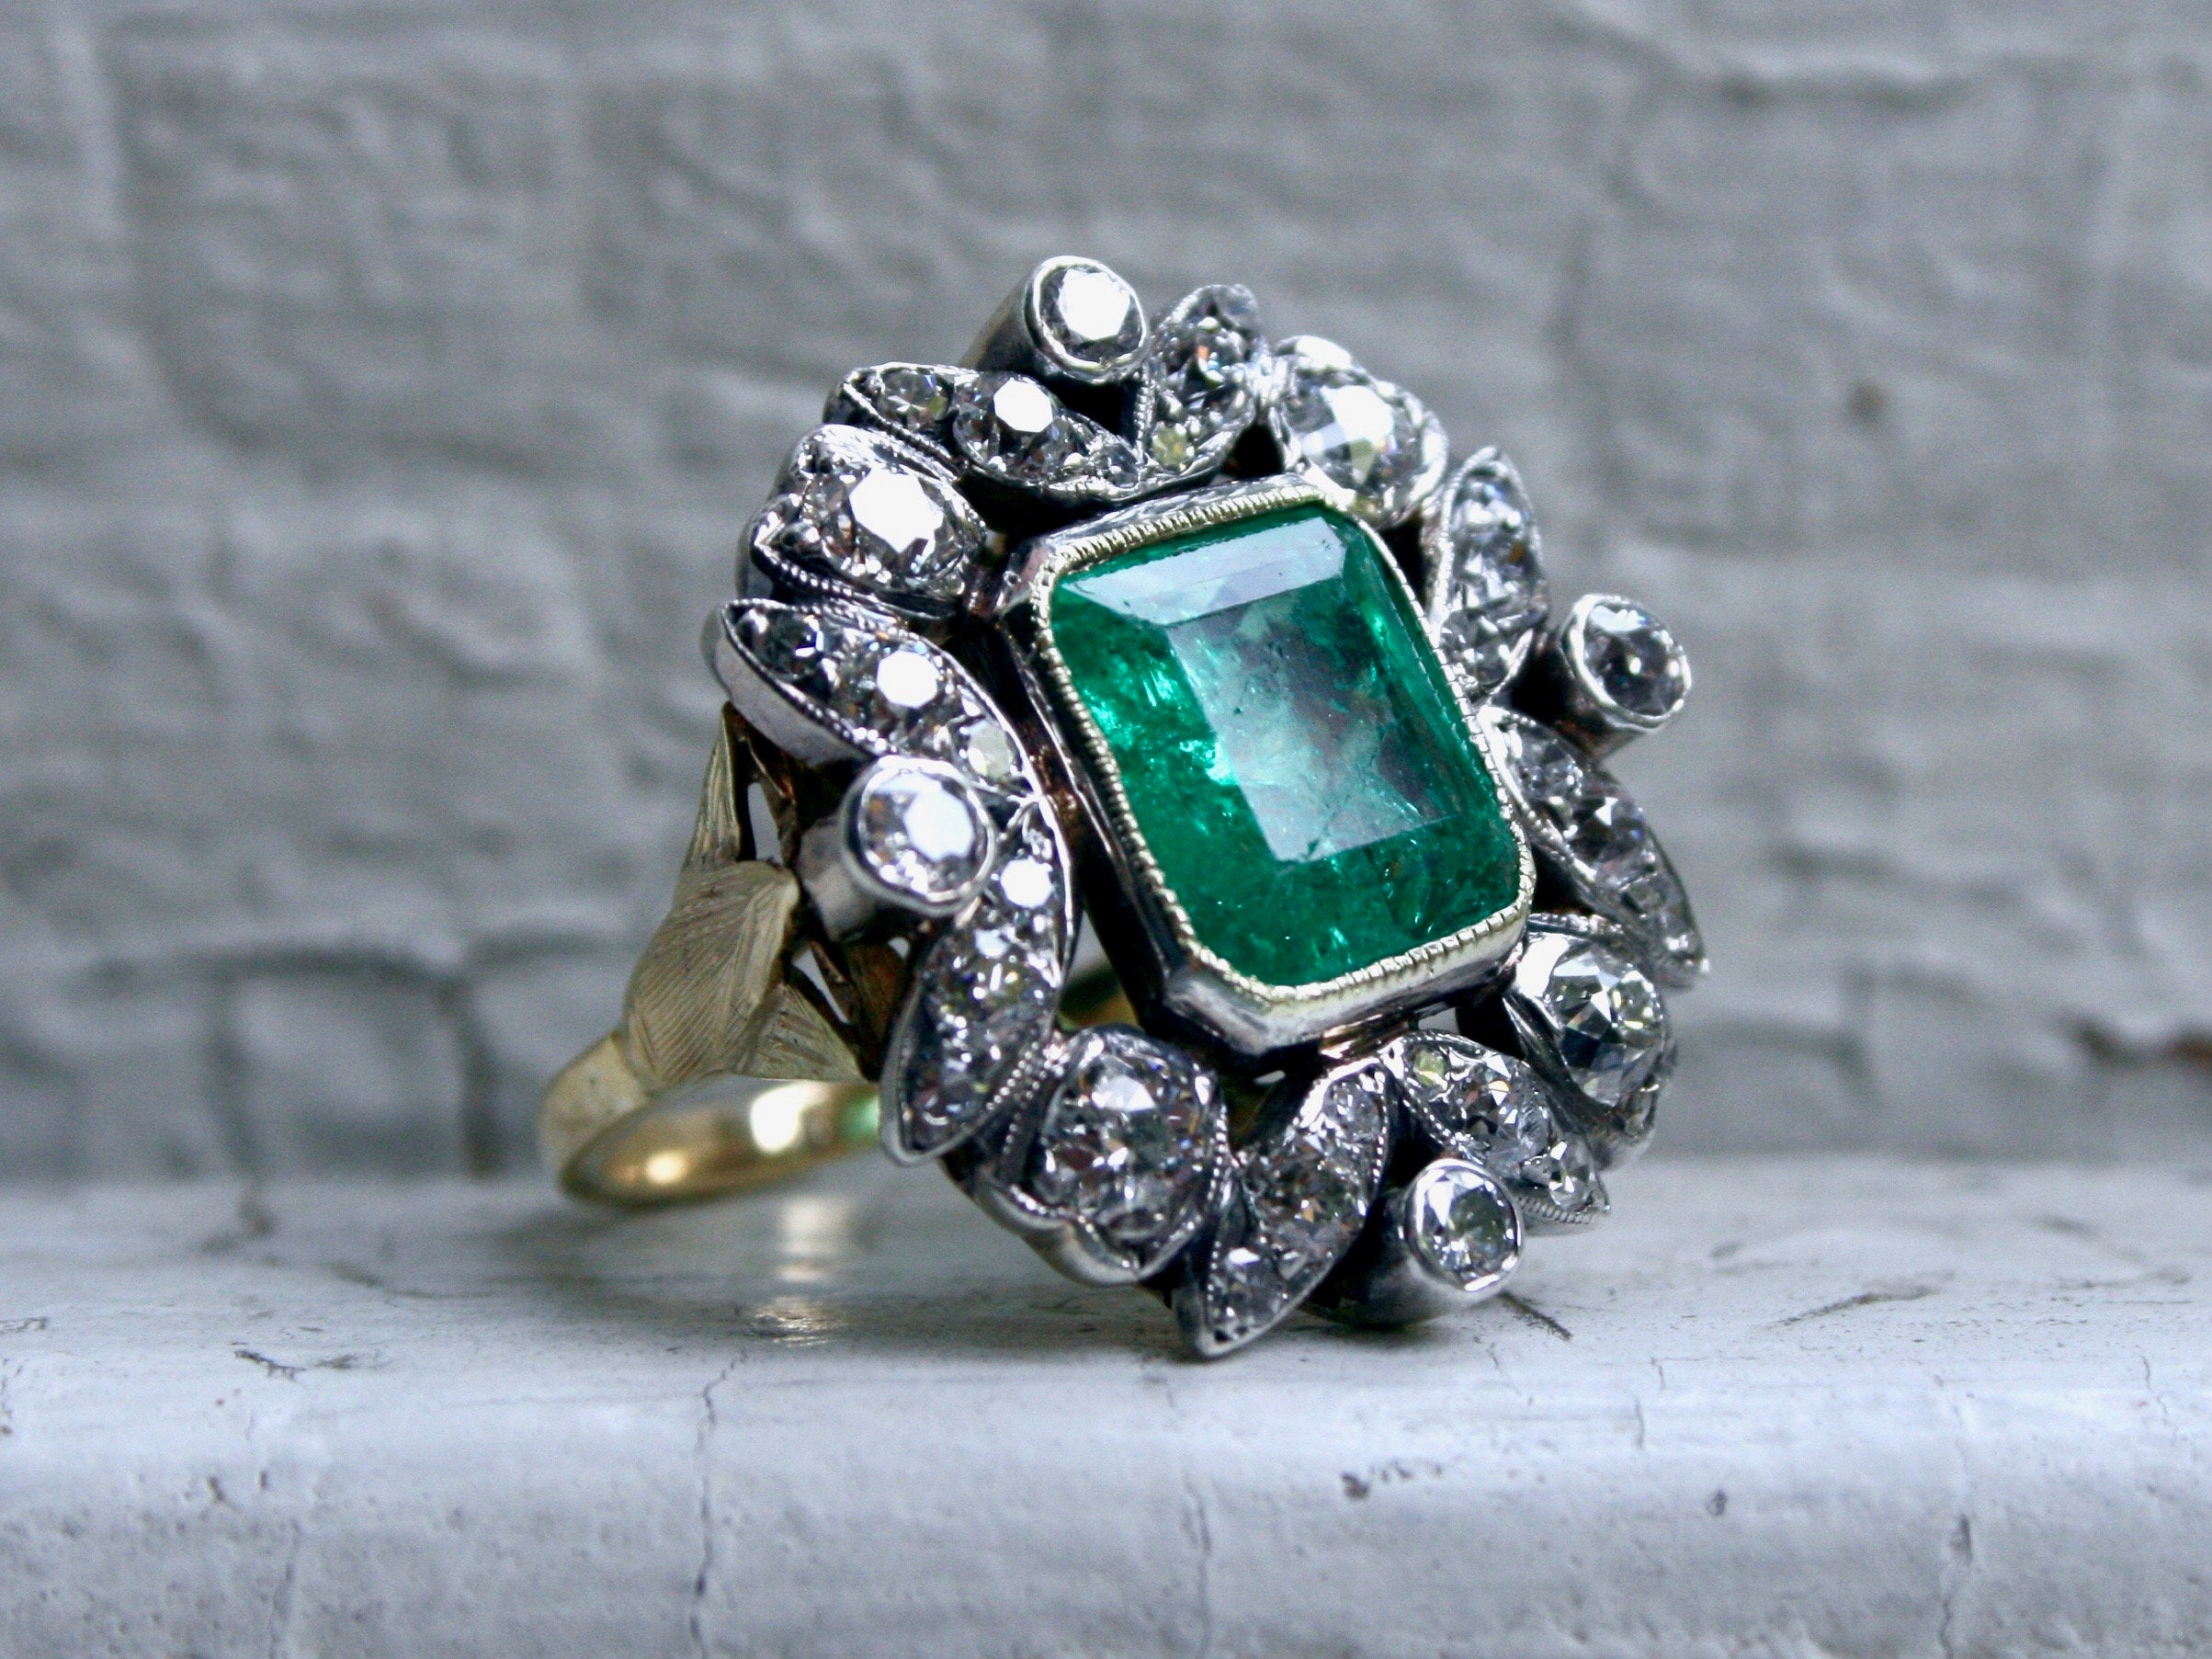 Stunning Victorian Antique 18K Yellow Gold/ Silver Diamond and Emerald Ring - 6.60ct.